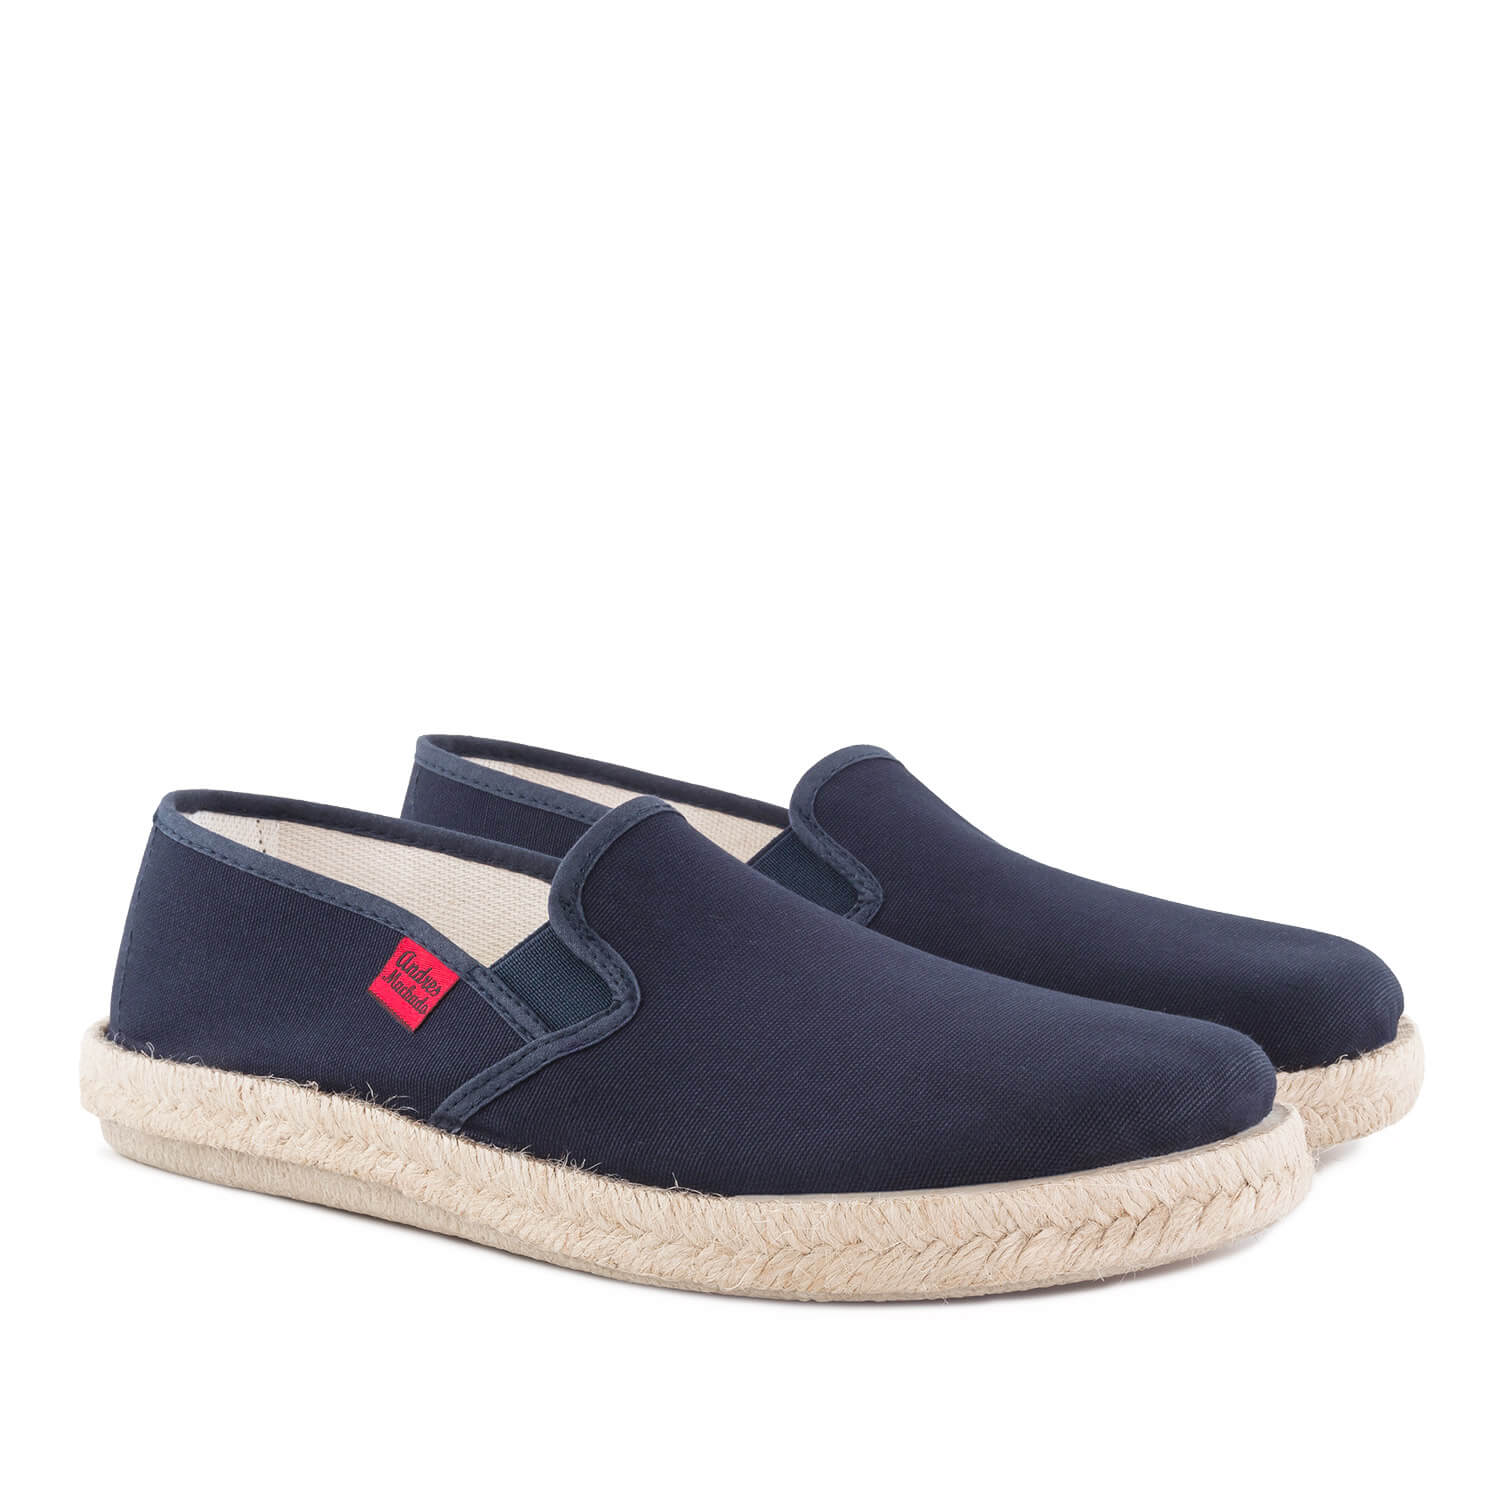 Mythical Navy Blue Canvas Slip-On Shoes with Jute and Rubber Sole 